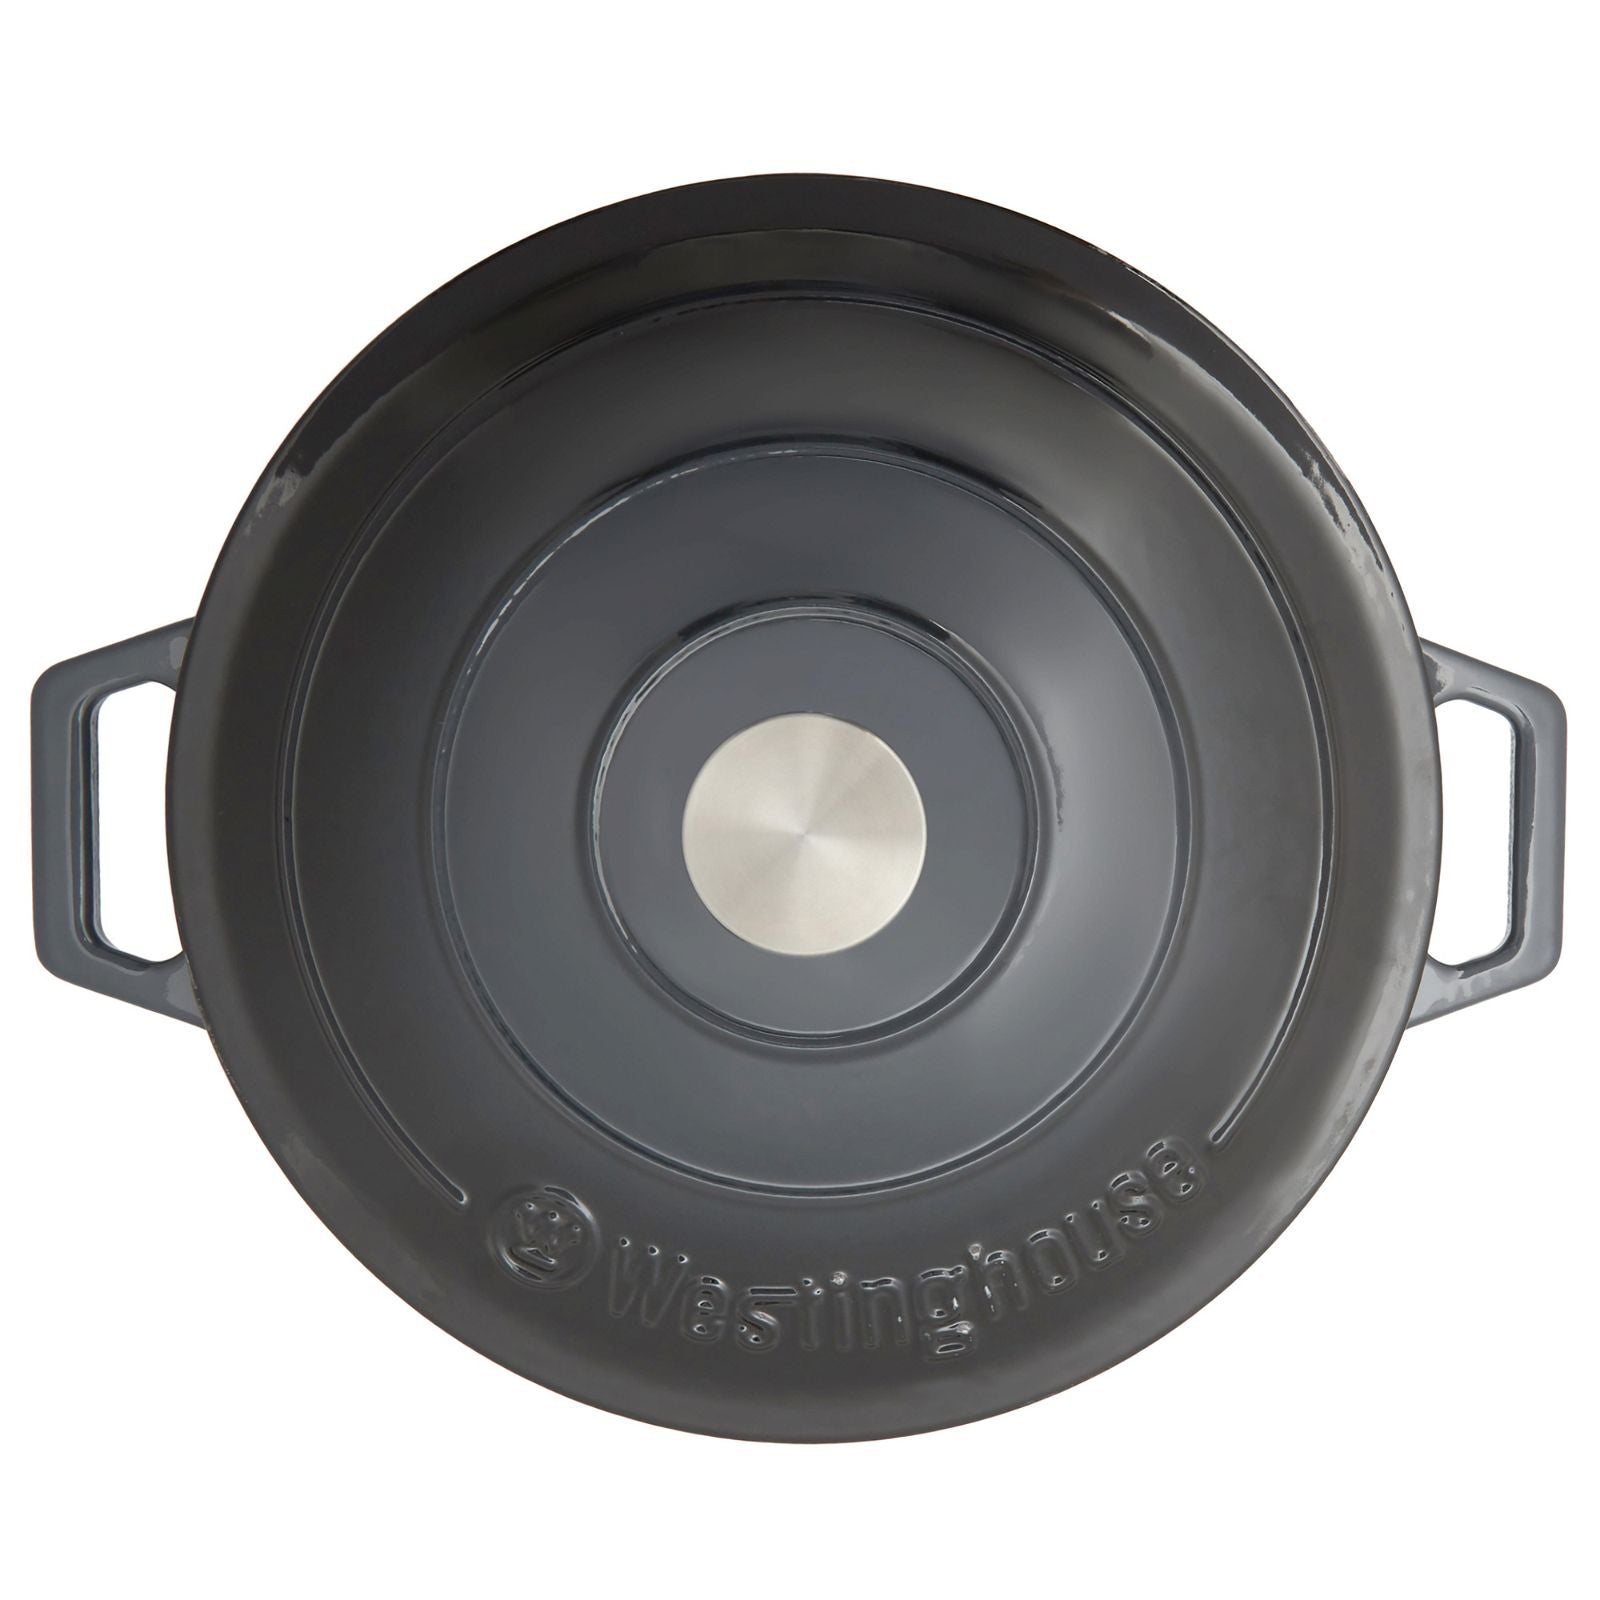 Westinghouse Cast Iron Pot 30cm Shallow Grey-#product_category#- Distributed by:  under license